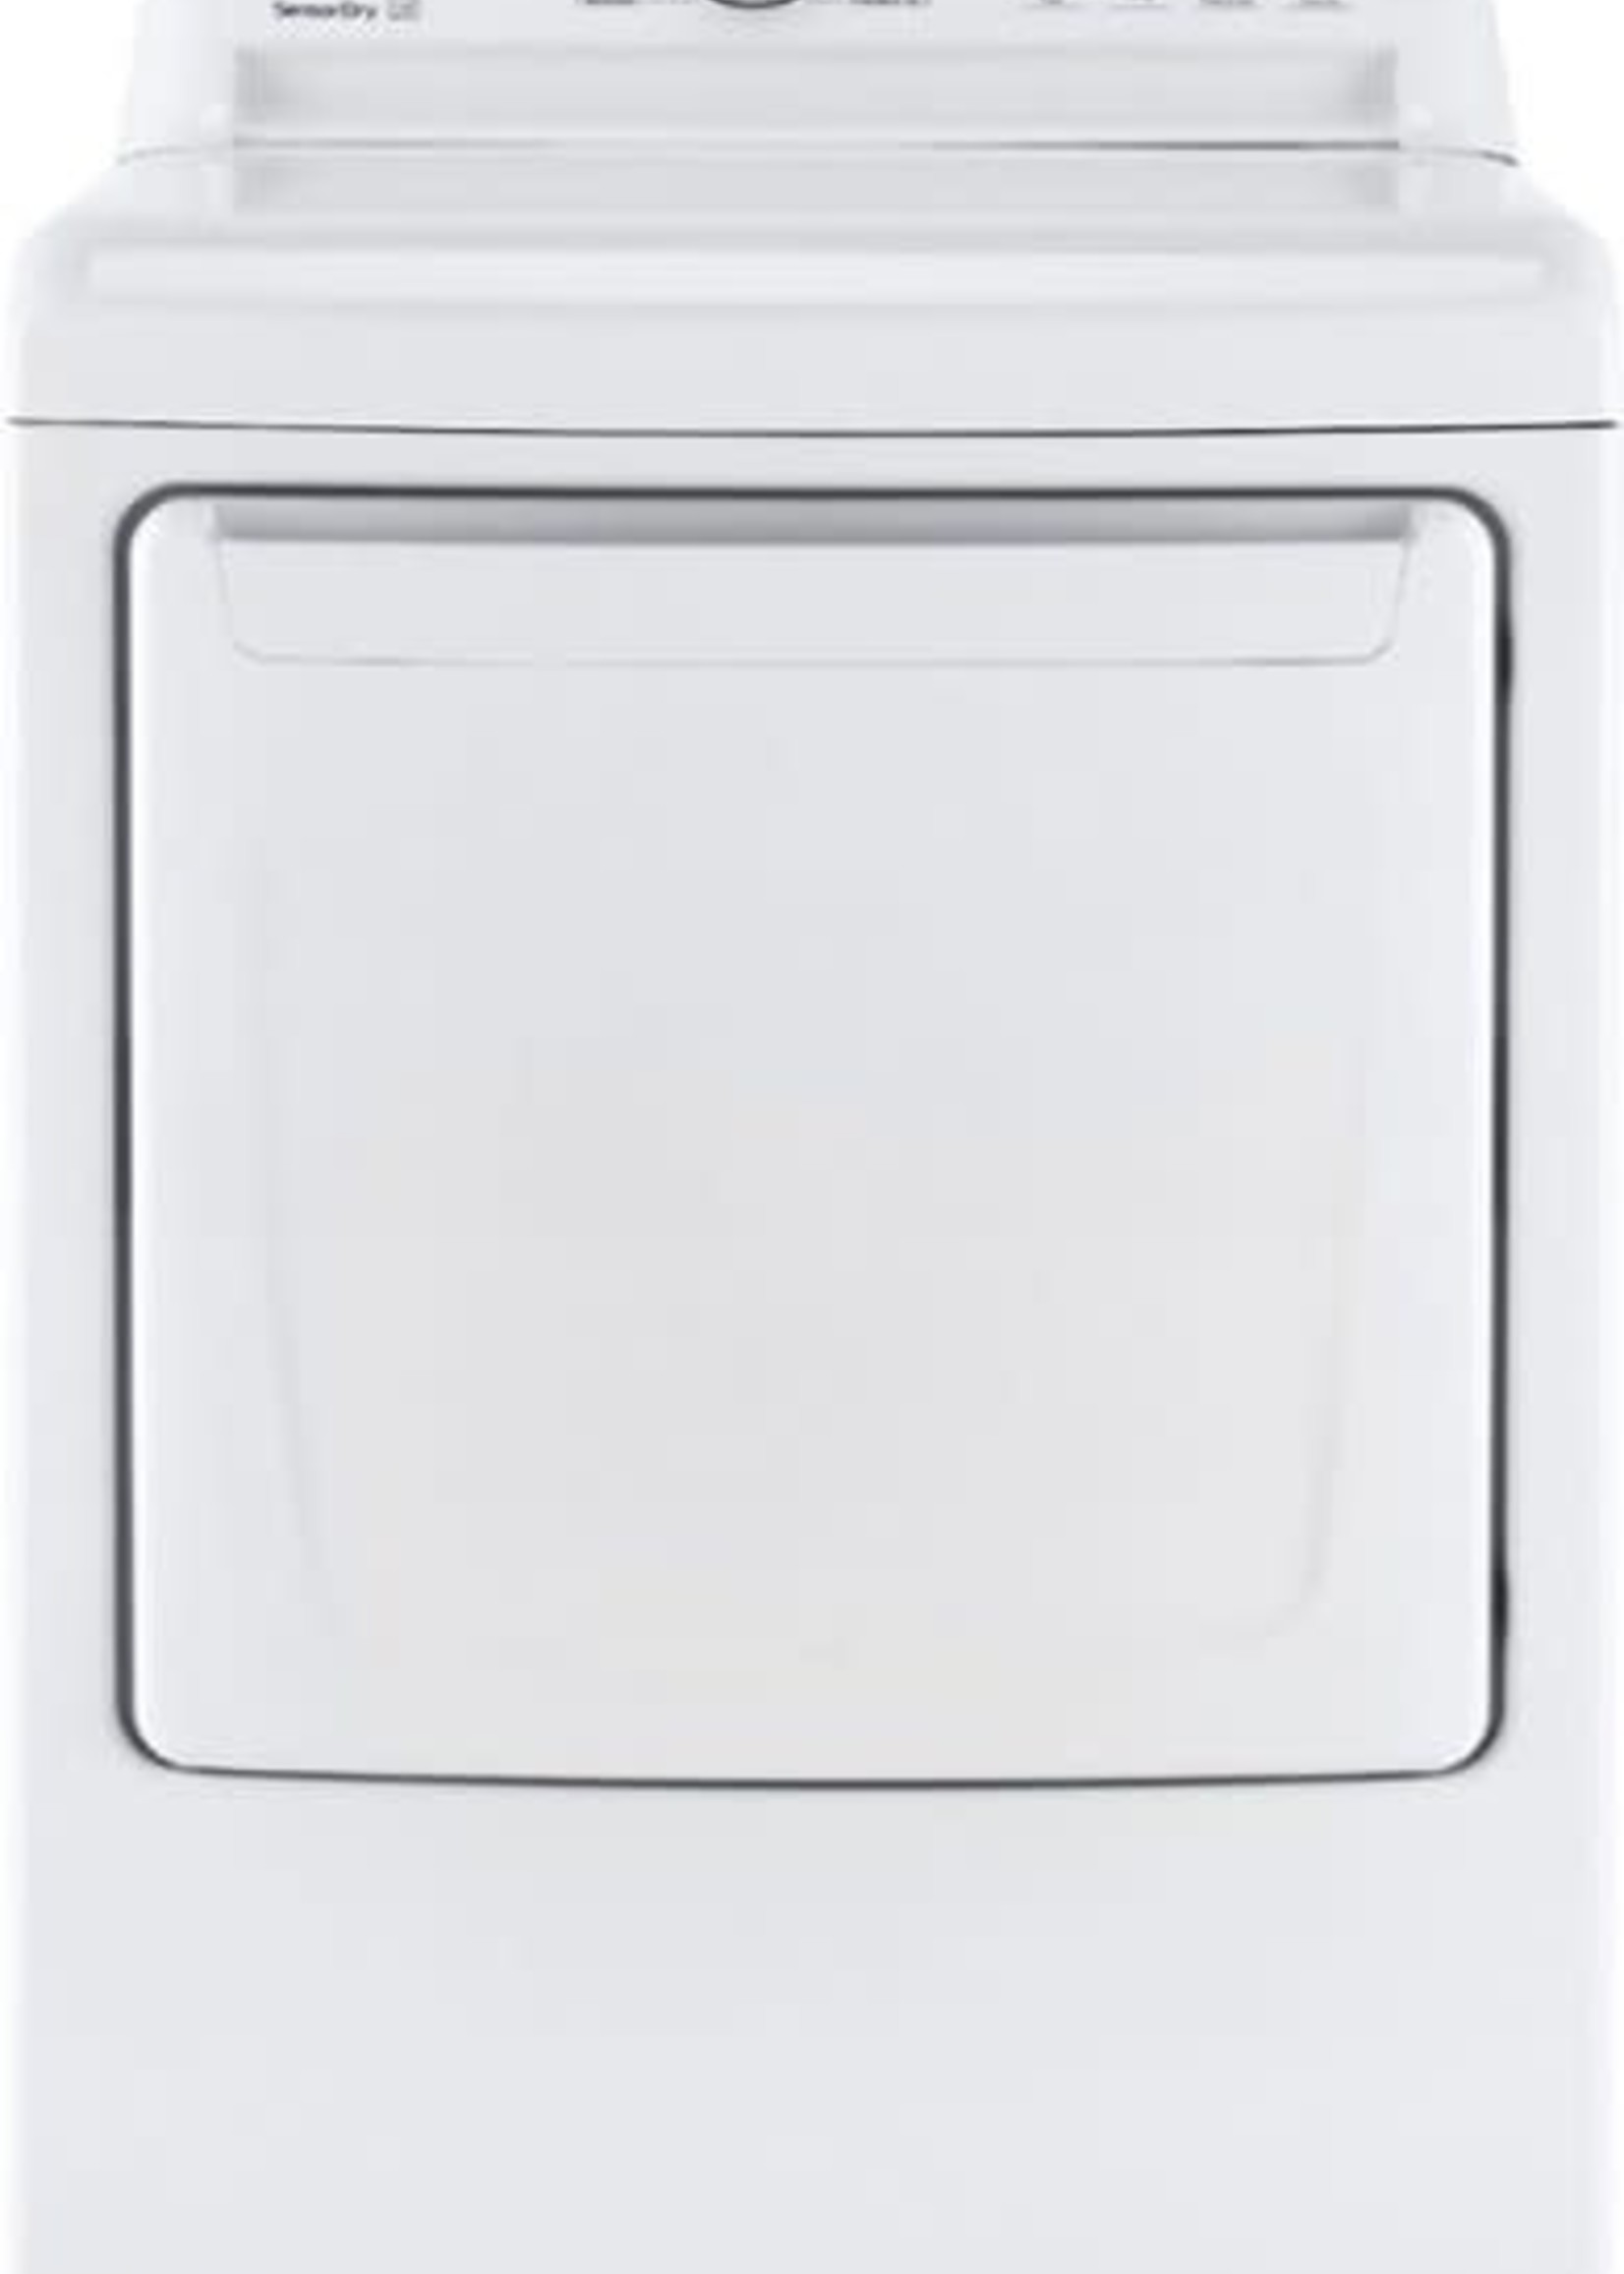 *LG  DLG7001W  7.3 cu. ft. Ultra Large High Efficiency White Gas Dryer with Sensor Dry